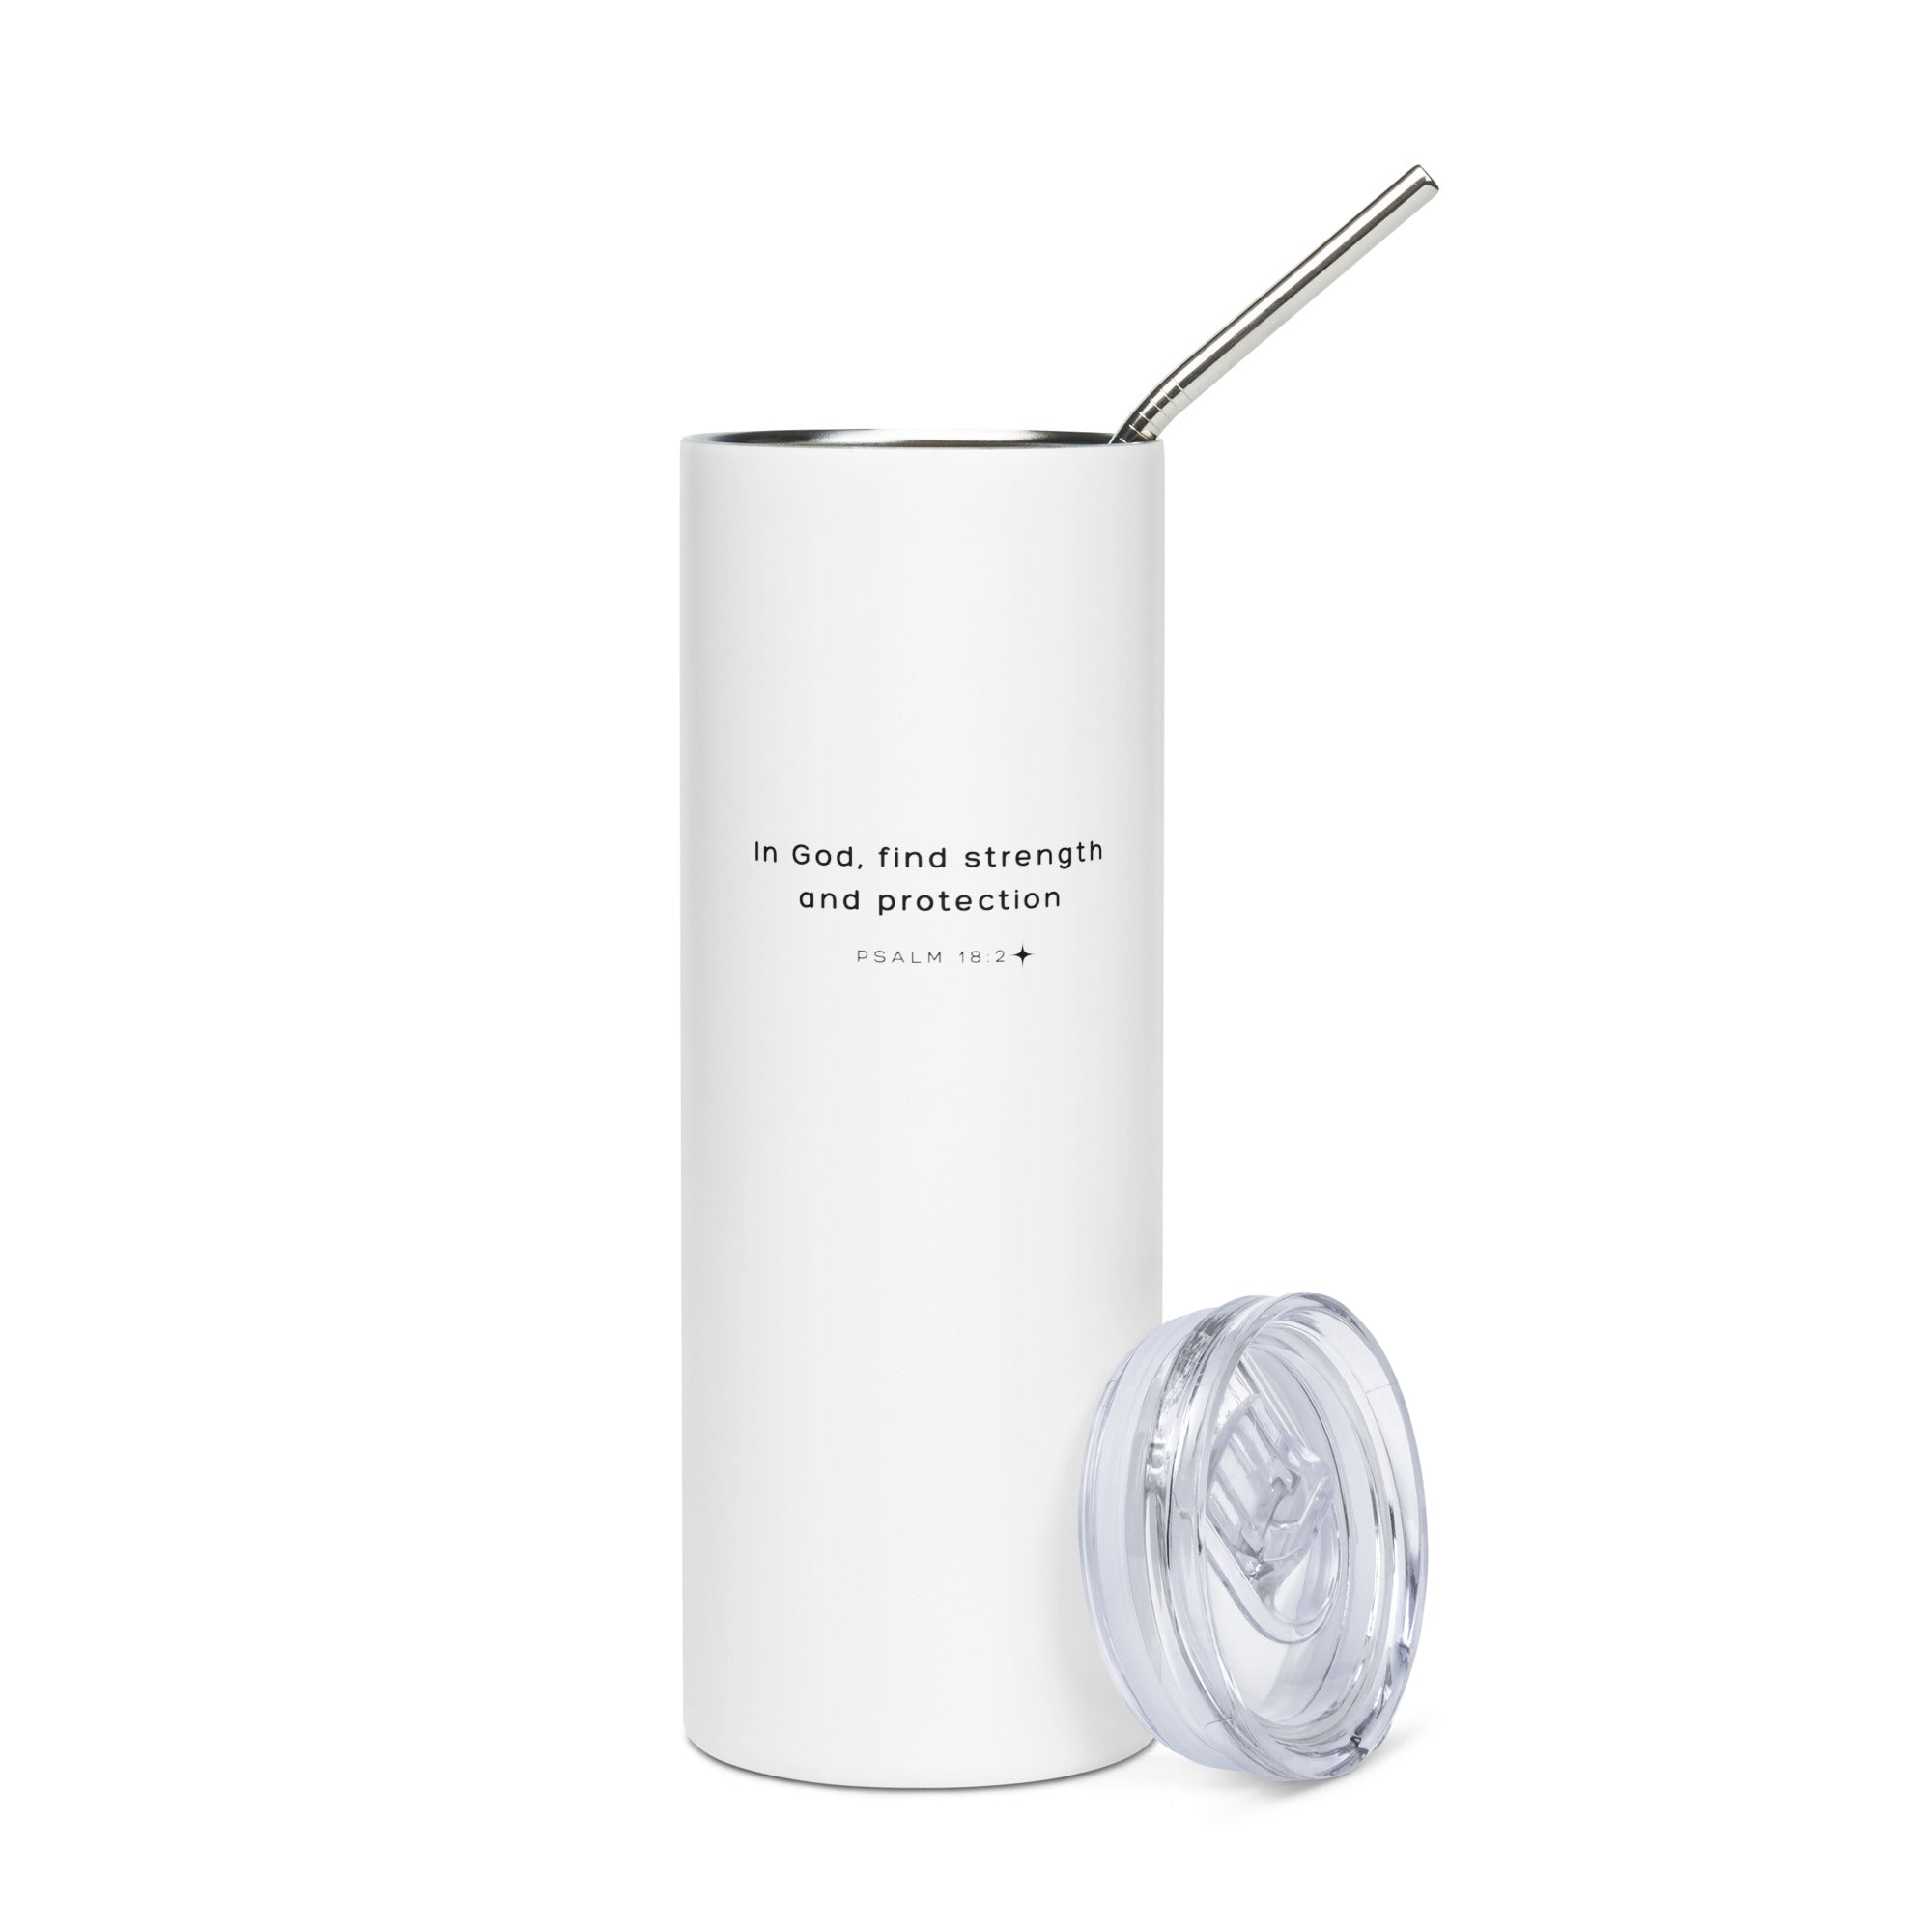 Stainless steel tumbler - Psalm 18:2